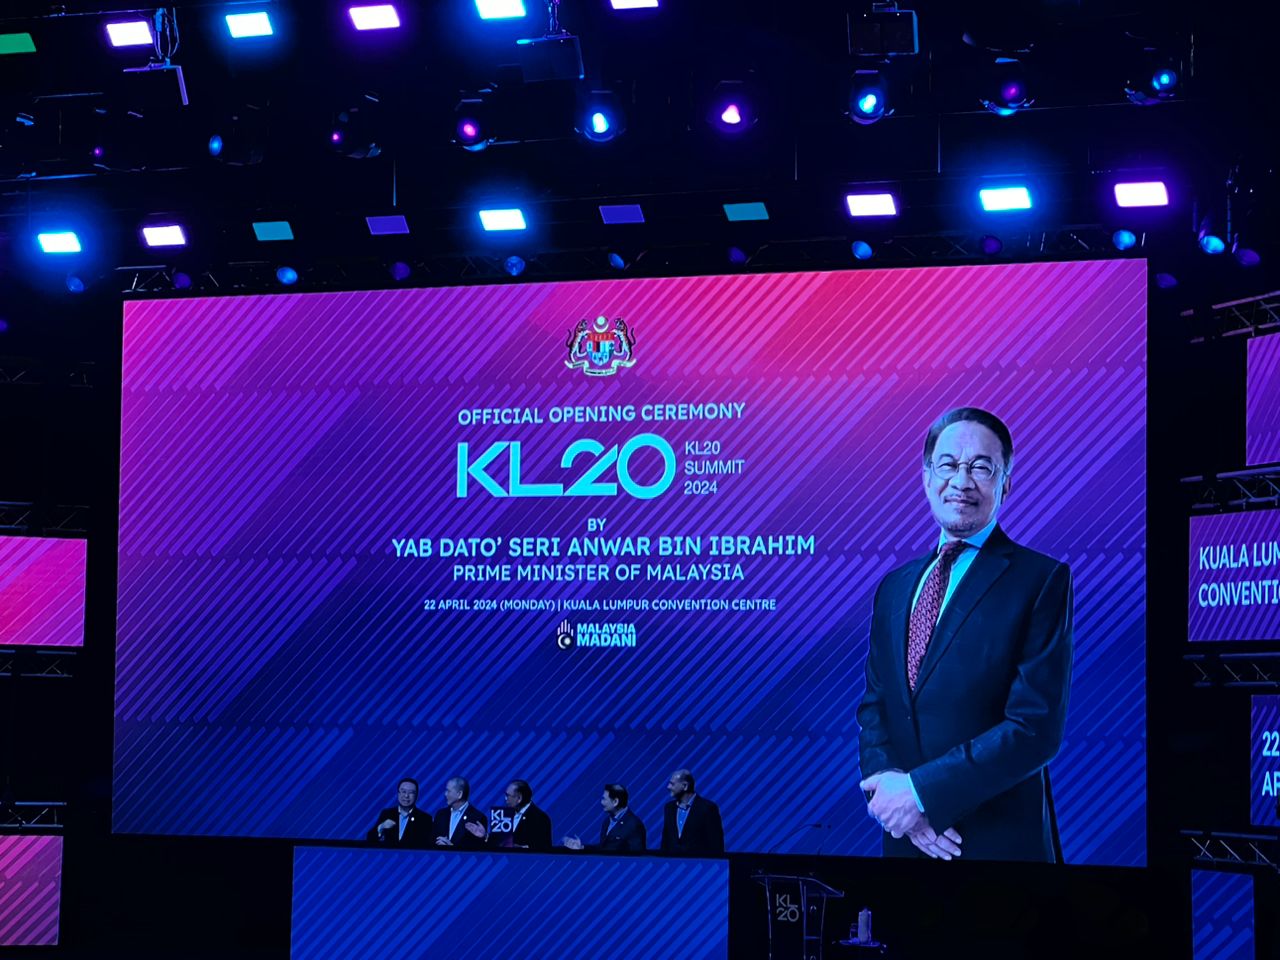 Khazanah, KWAP & Blue Chip VC to invest up to RM3bil in sea – Anwar at KL20